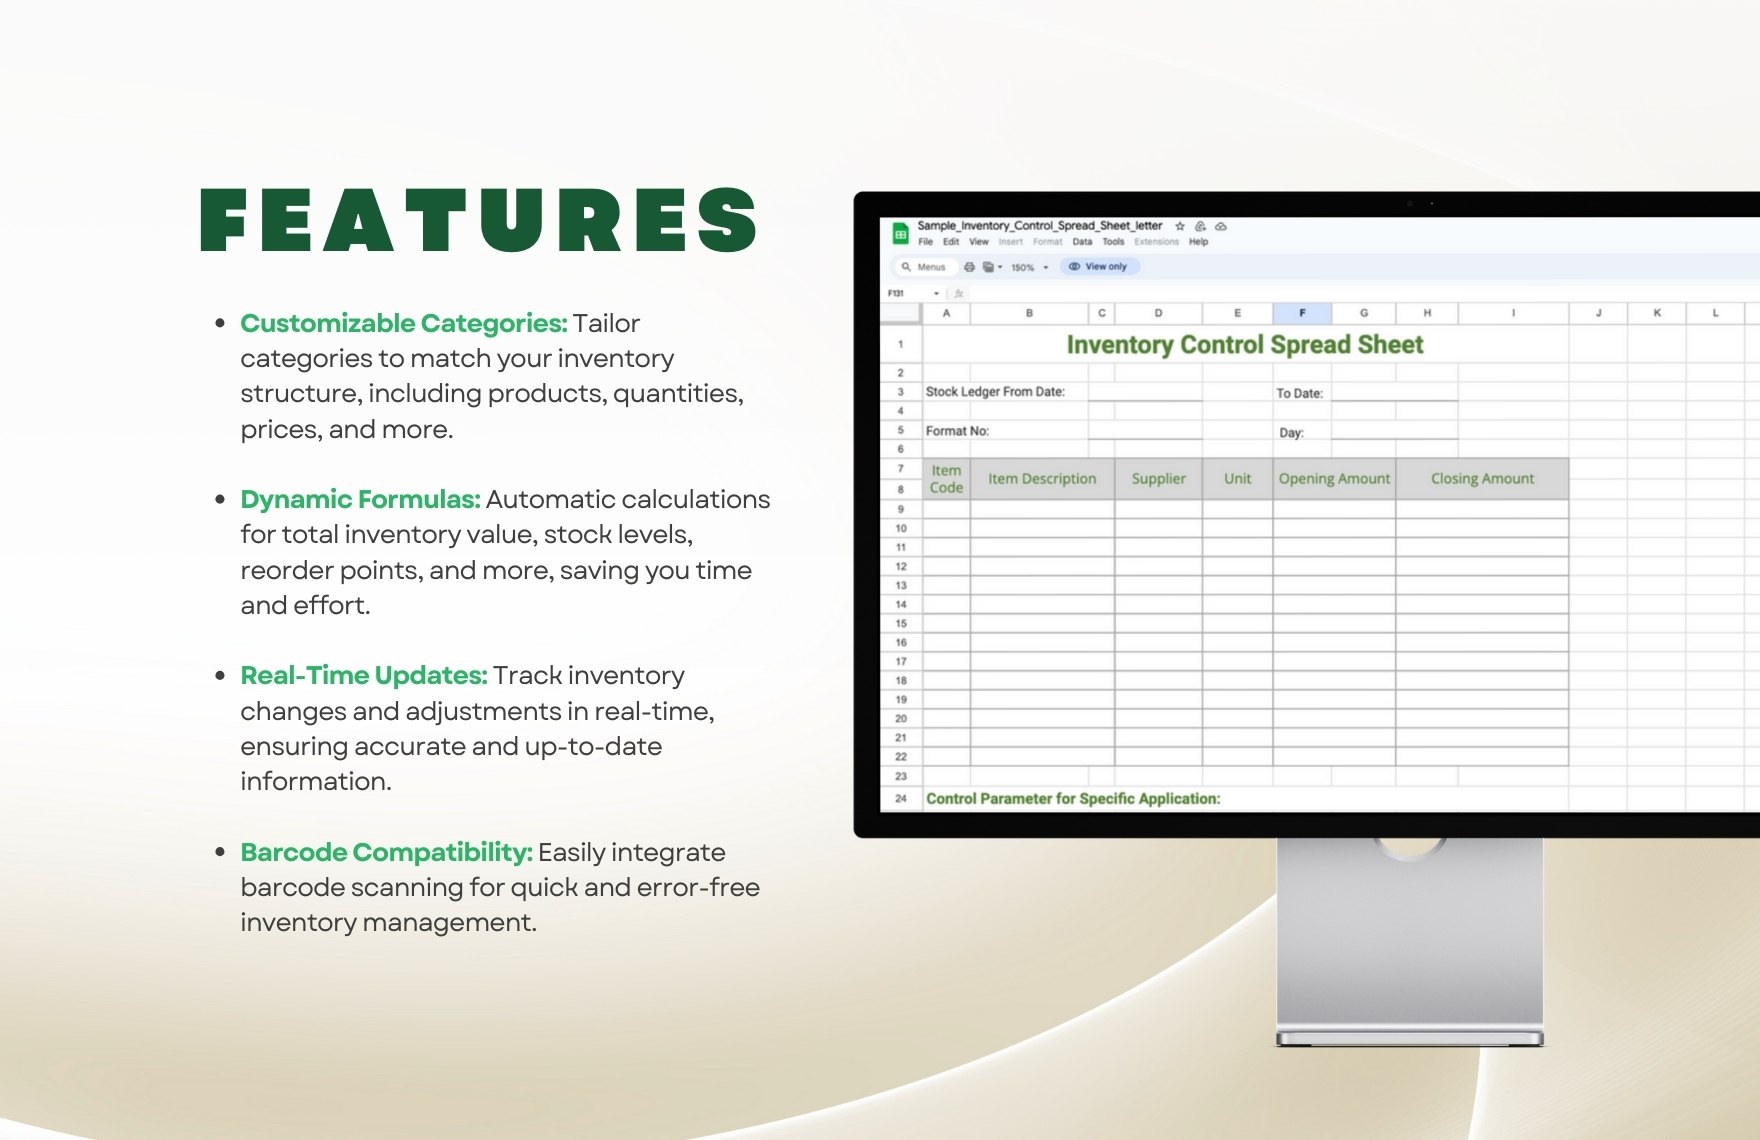 Sample Inventory Control Spreadsheet Template